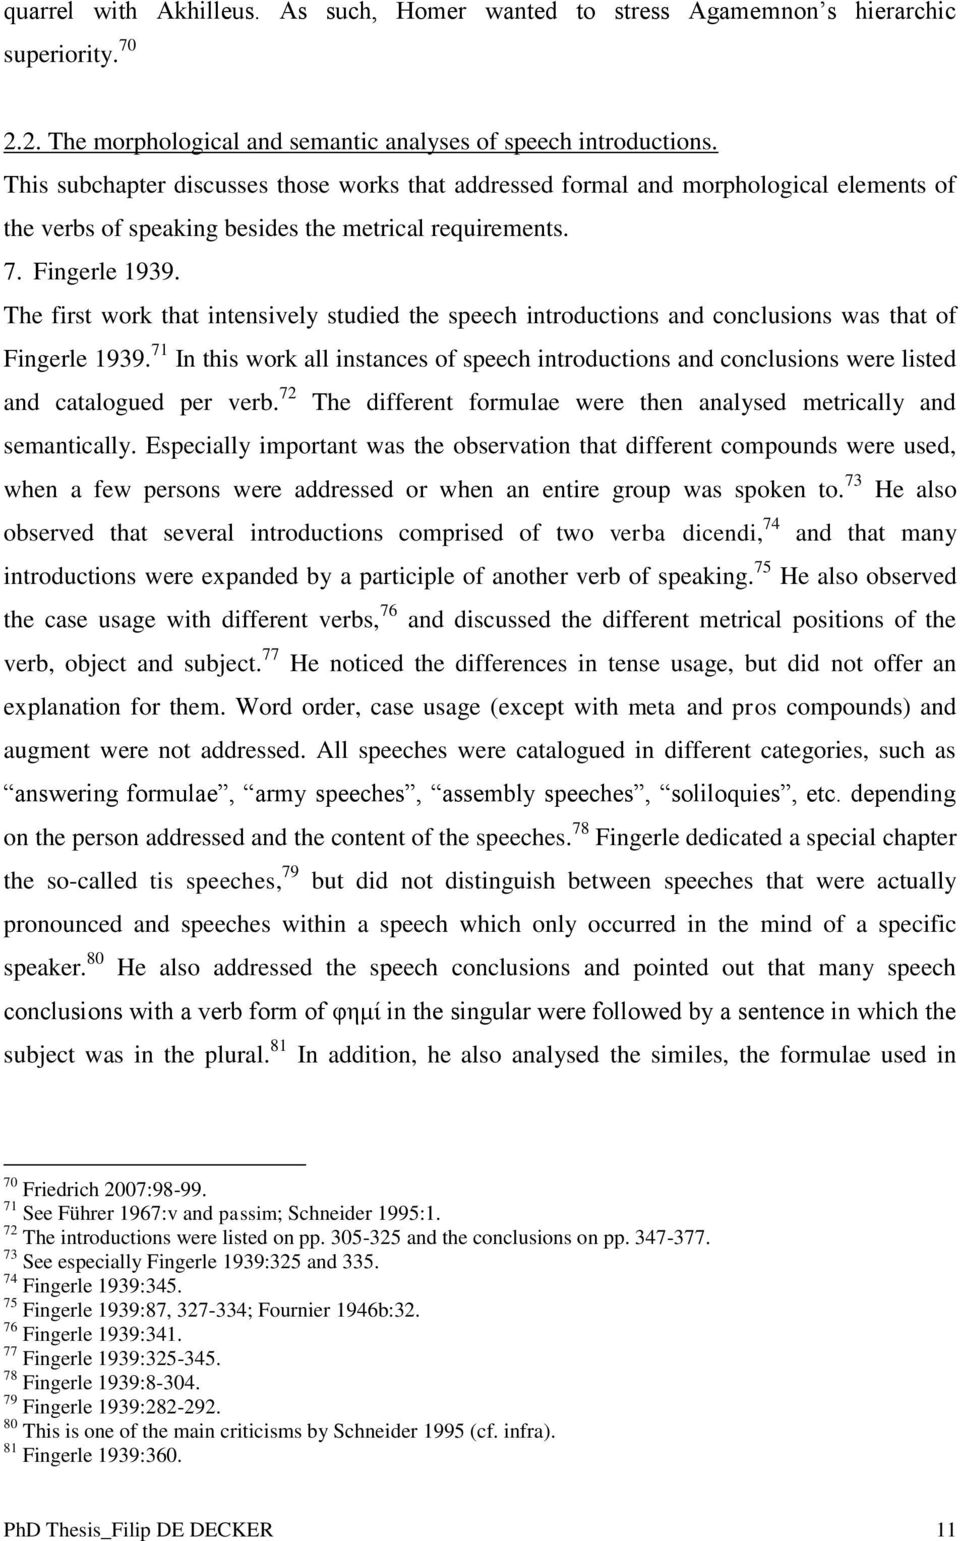 The first work that intensively studied the speech introductions and conclusions was that of Fingerle 1939.